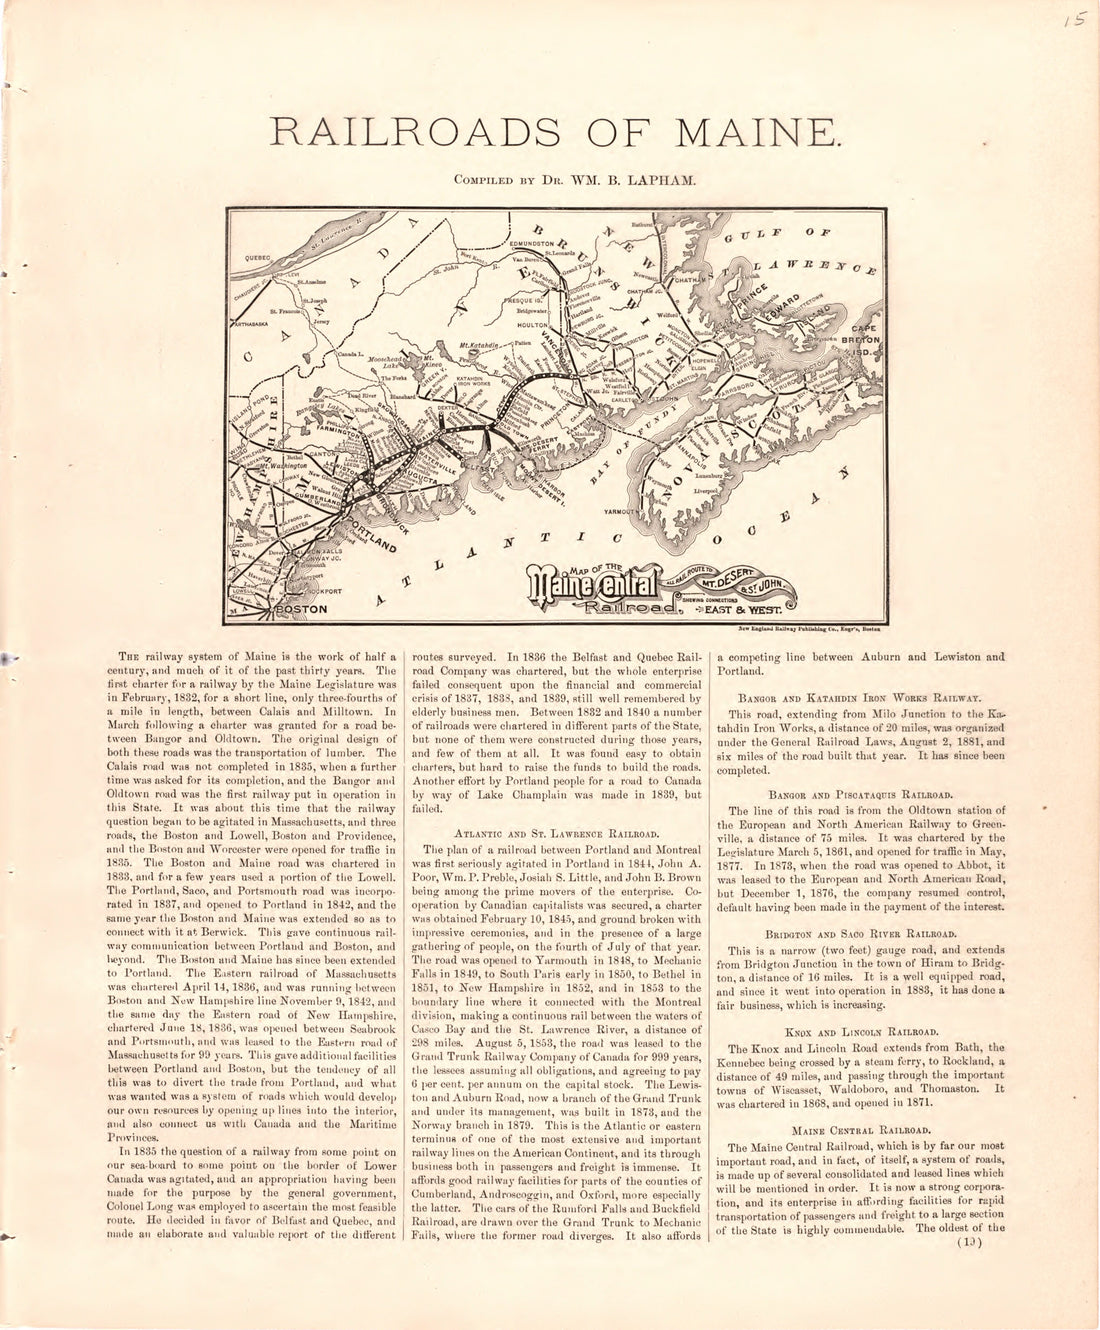 This hand drawn illustration (map) of Railroads of Maine from Colby&